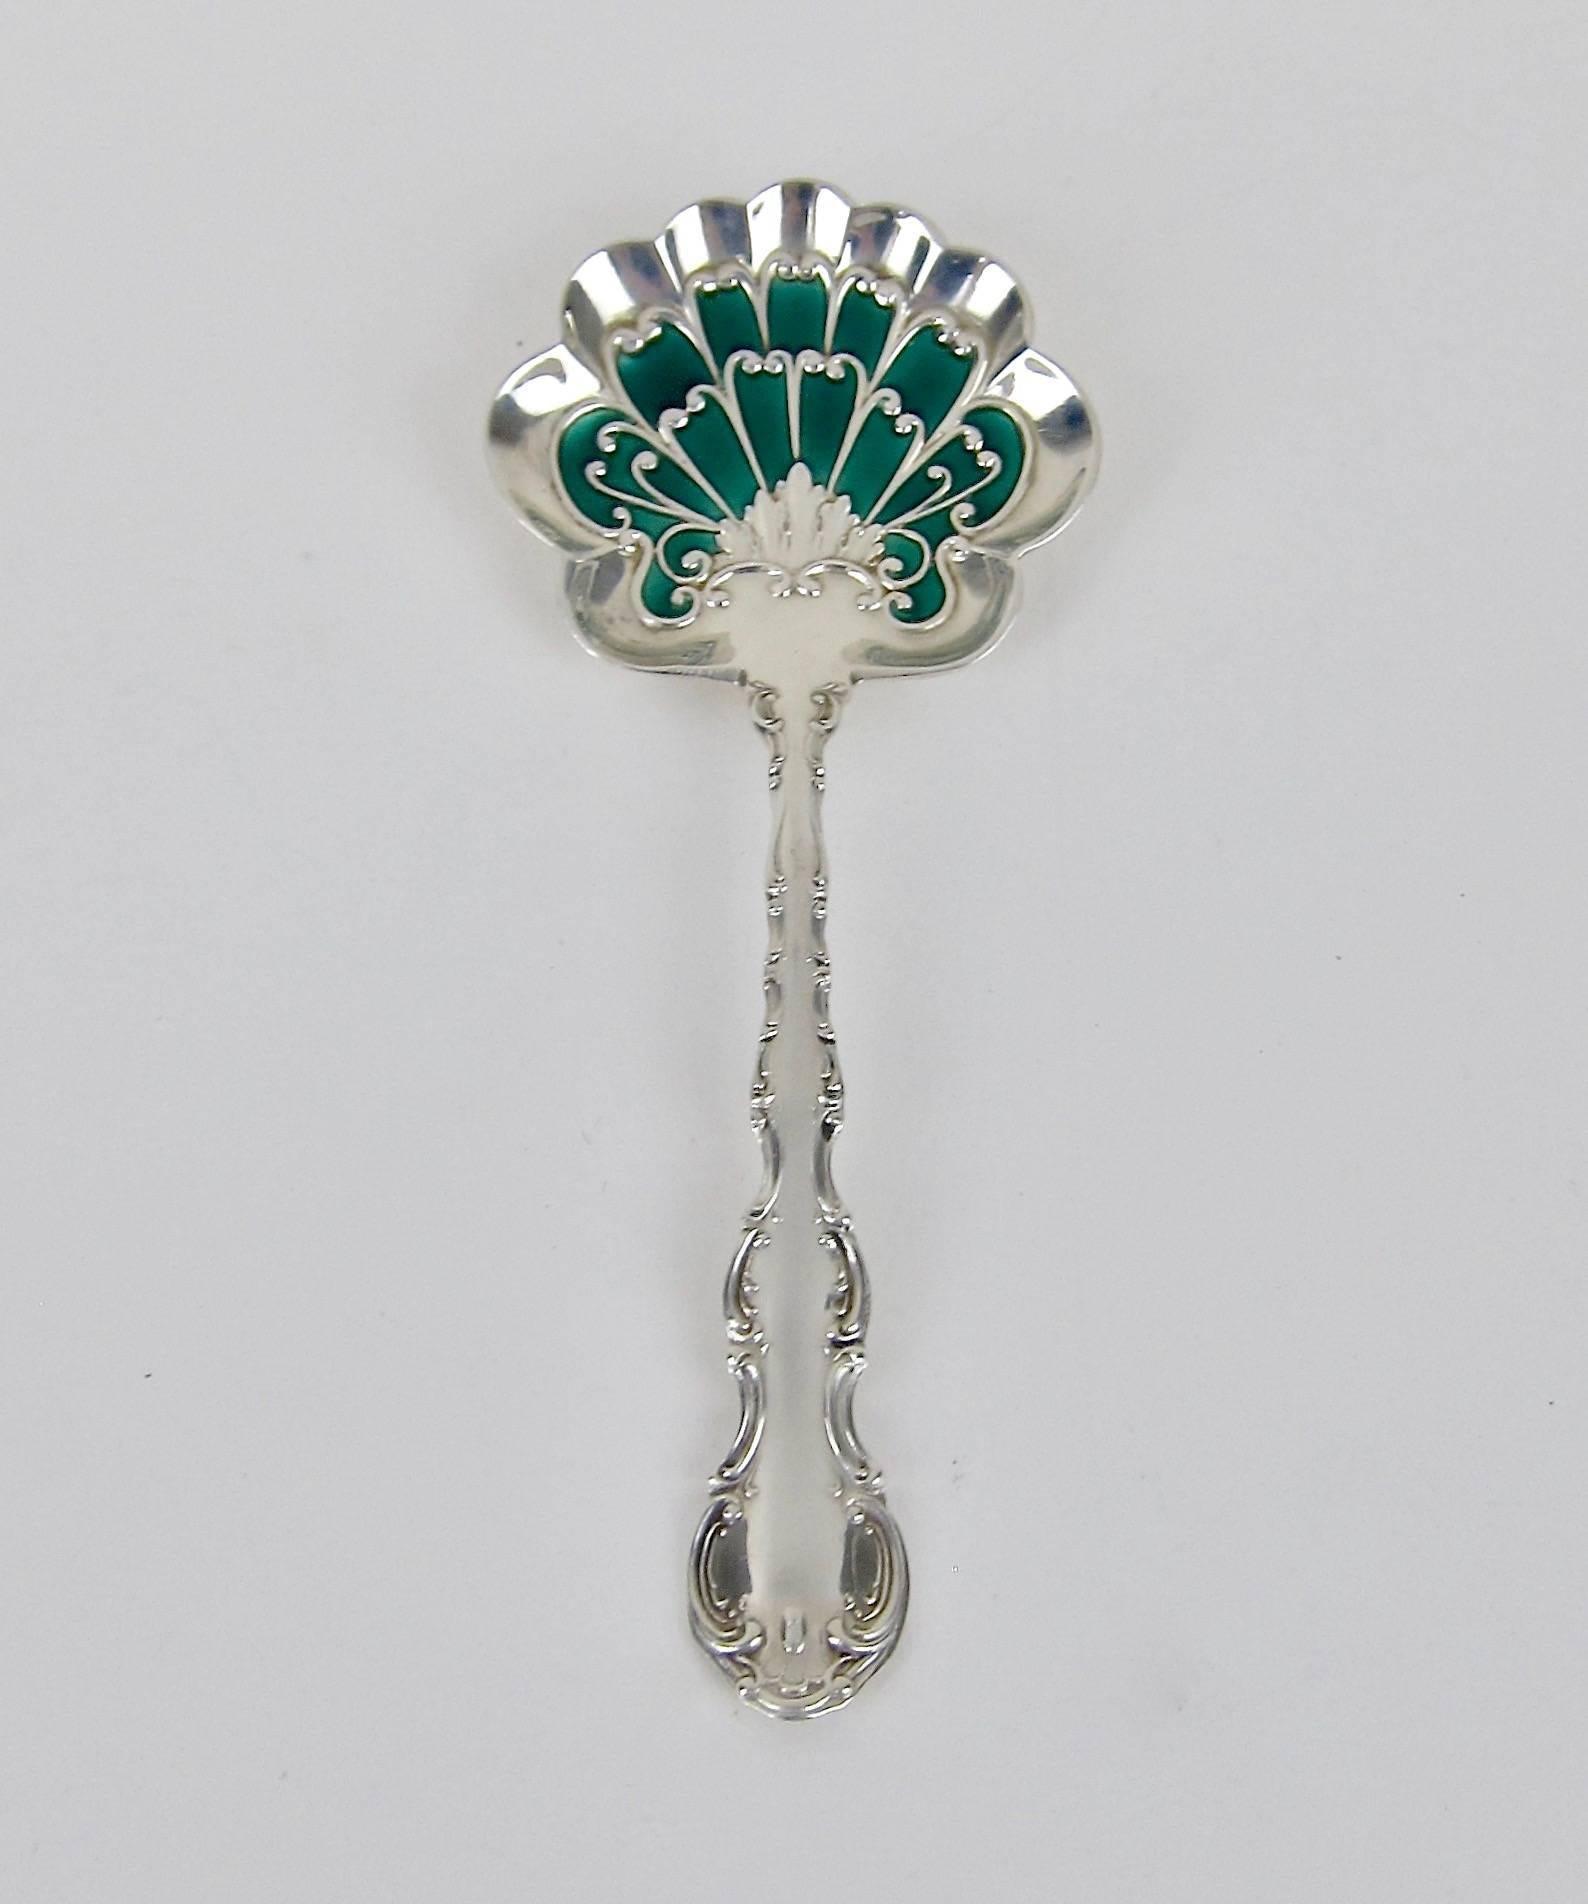 An antique bon bon spoon in solid sterling silver with contrasting enamel decoration of bright green from Gorham Manufacturing Company of Providence, Rhode Island. The spoon is from the company's Strasbourg pattern featuring scalloped edges,